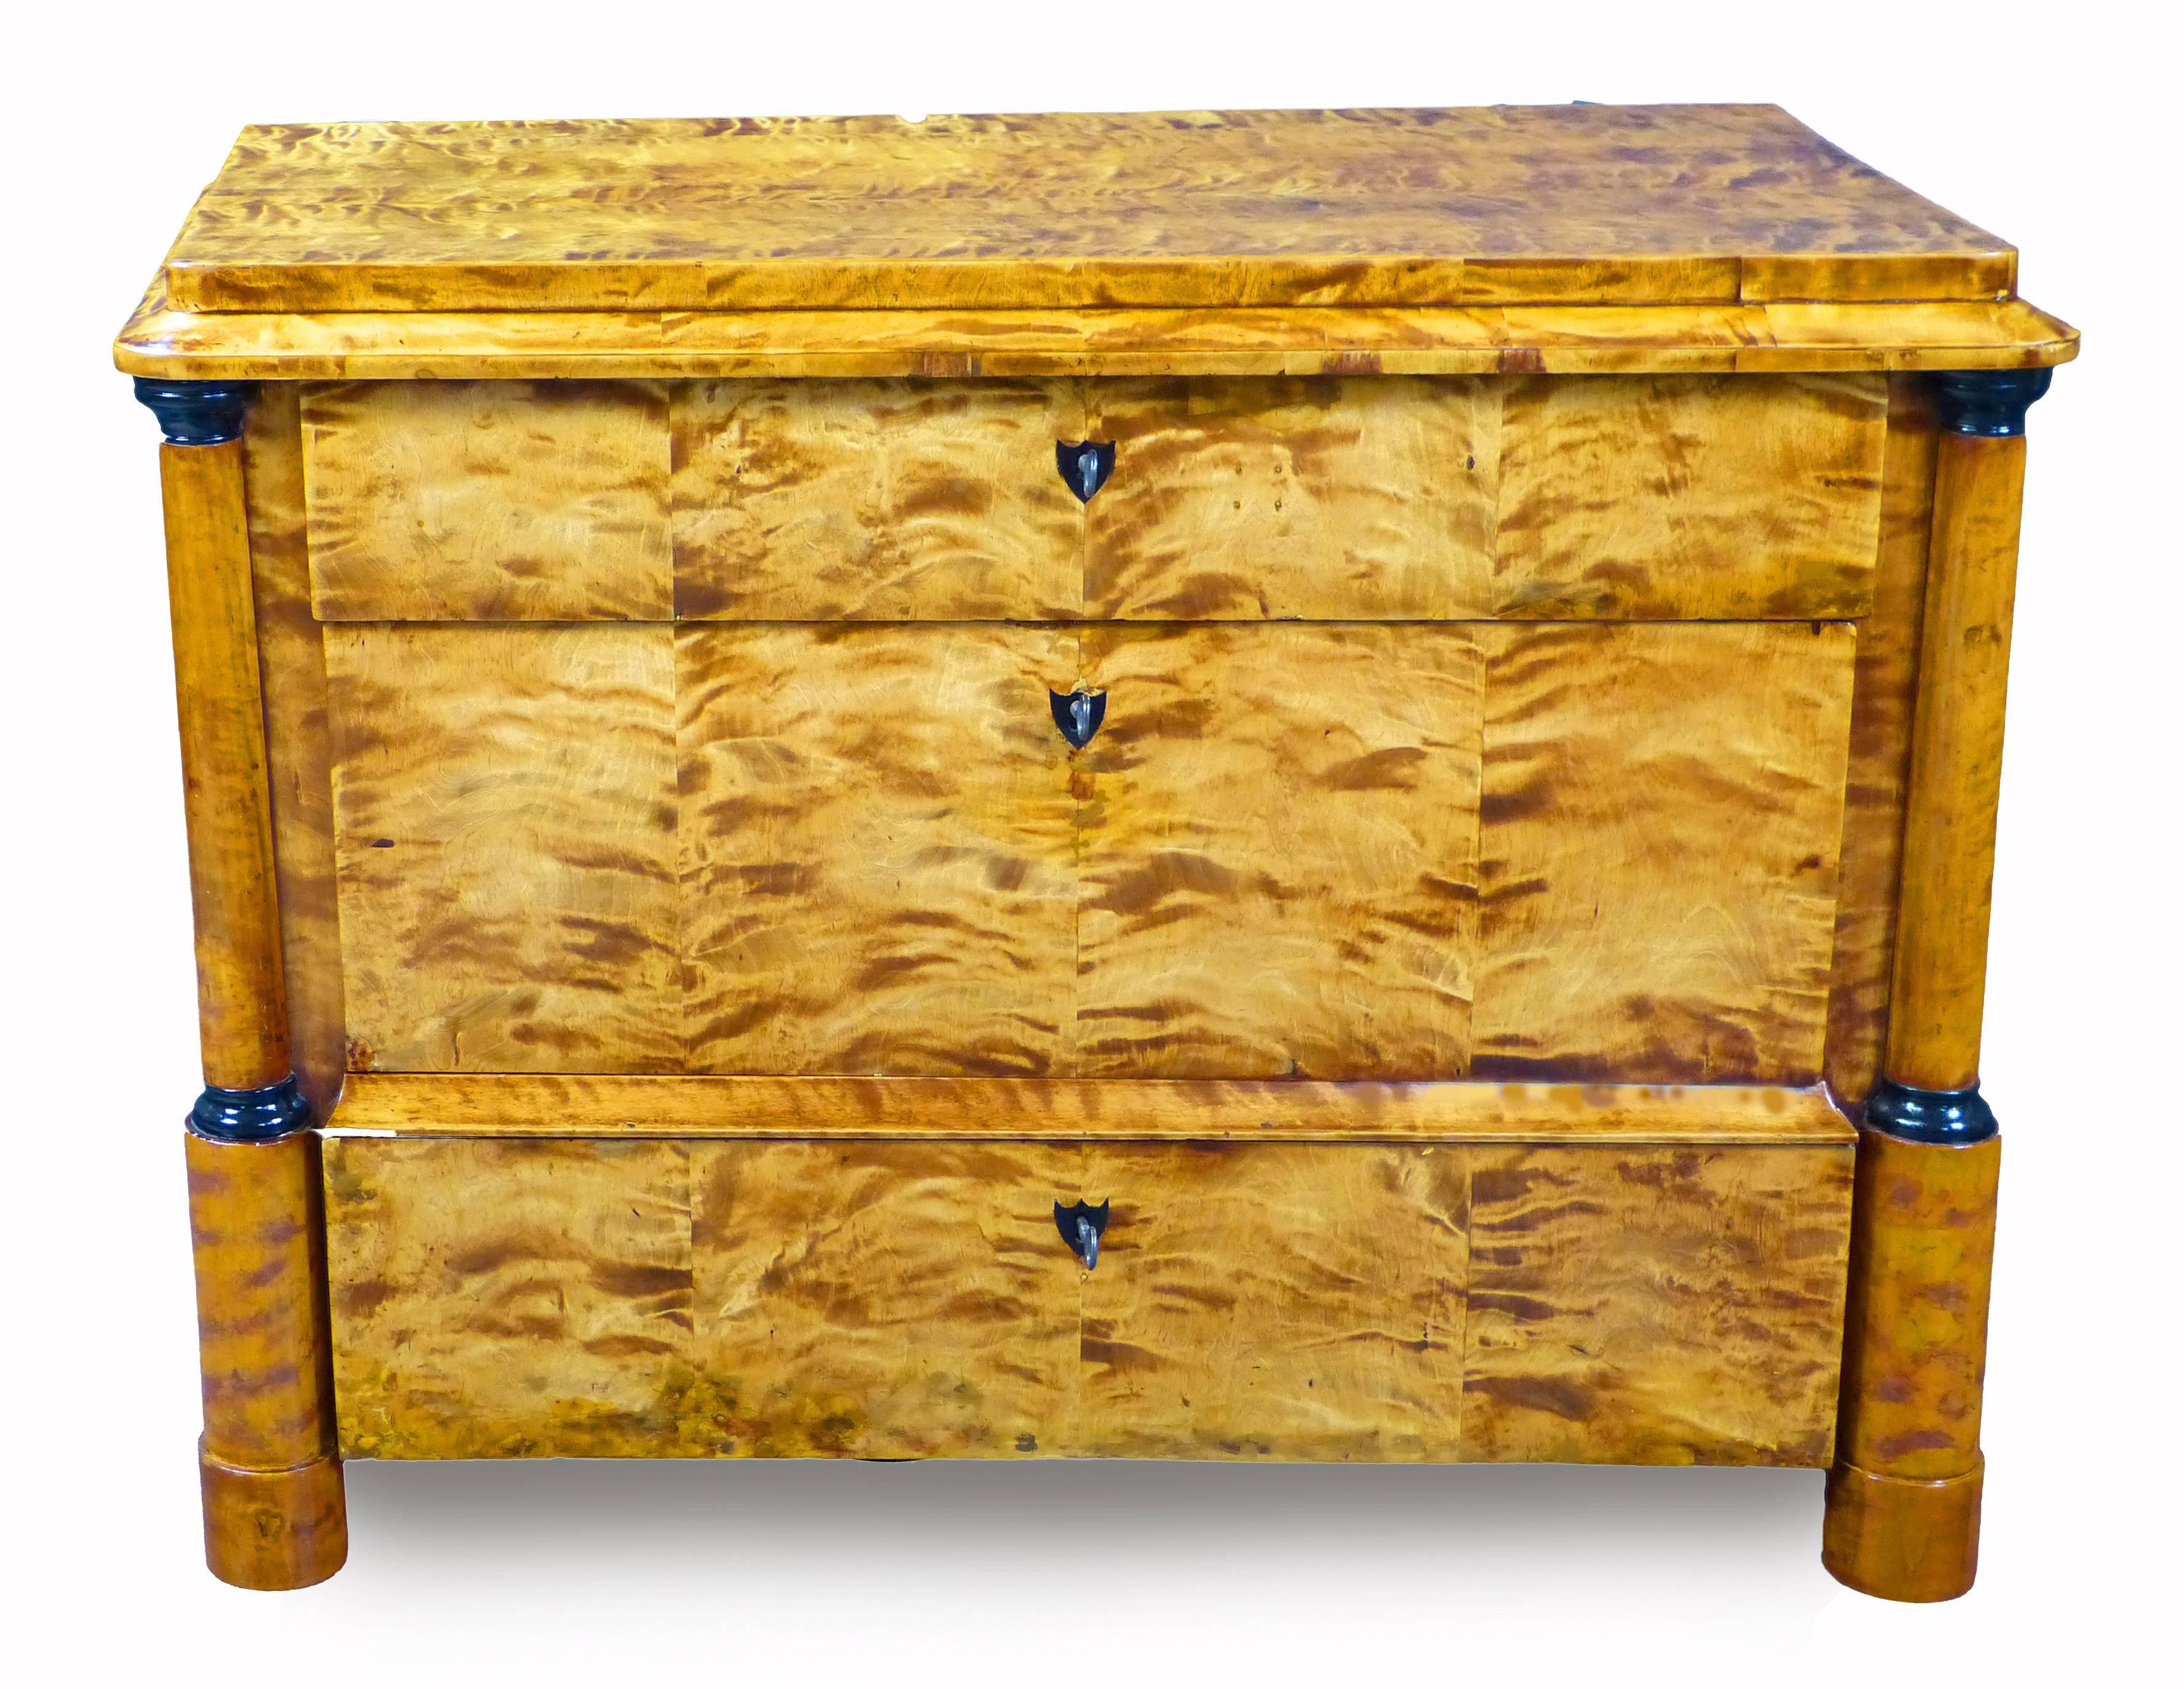 Unusual early 19th century, North German Biedermeier commode of fine tiger maple veneers in their natural color. Two frontal columns with ebonized ring capitols flanking 3 drawers of varying size and shape with black buffalo horn escutcheon